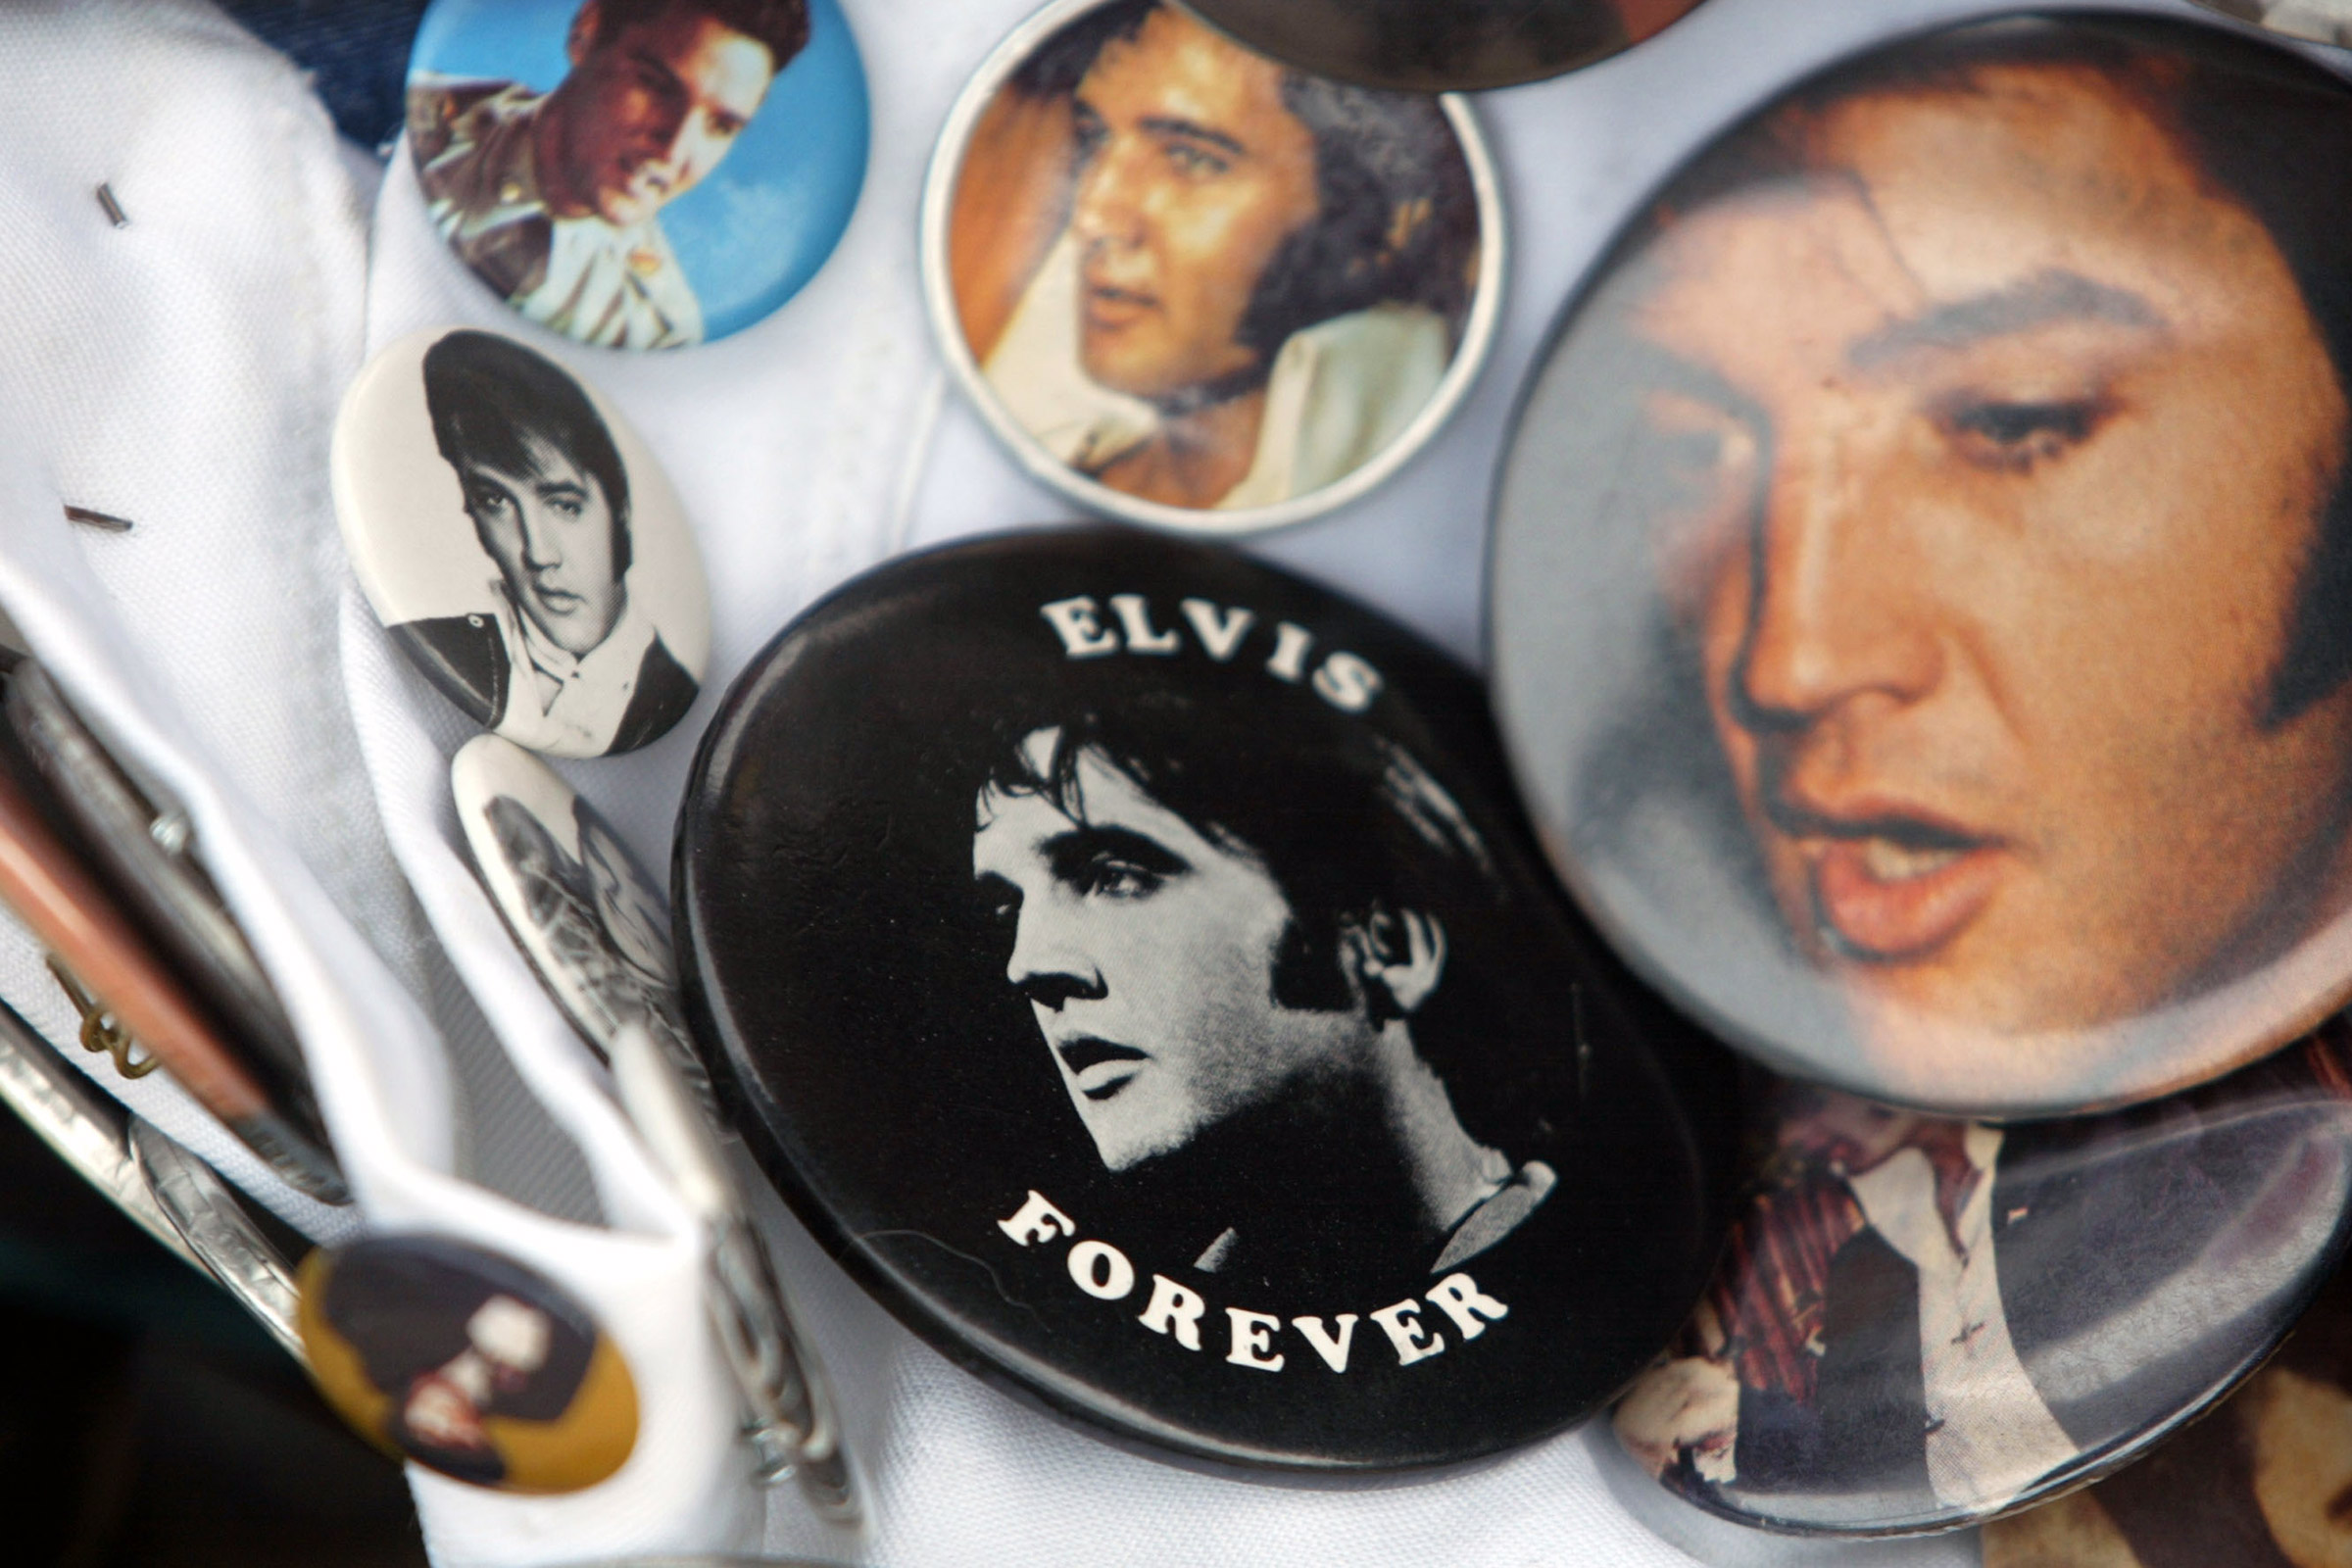 A New Movie Revisits Elvis Presley's Complicated Legacy